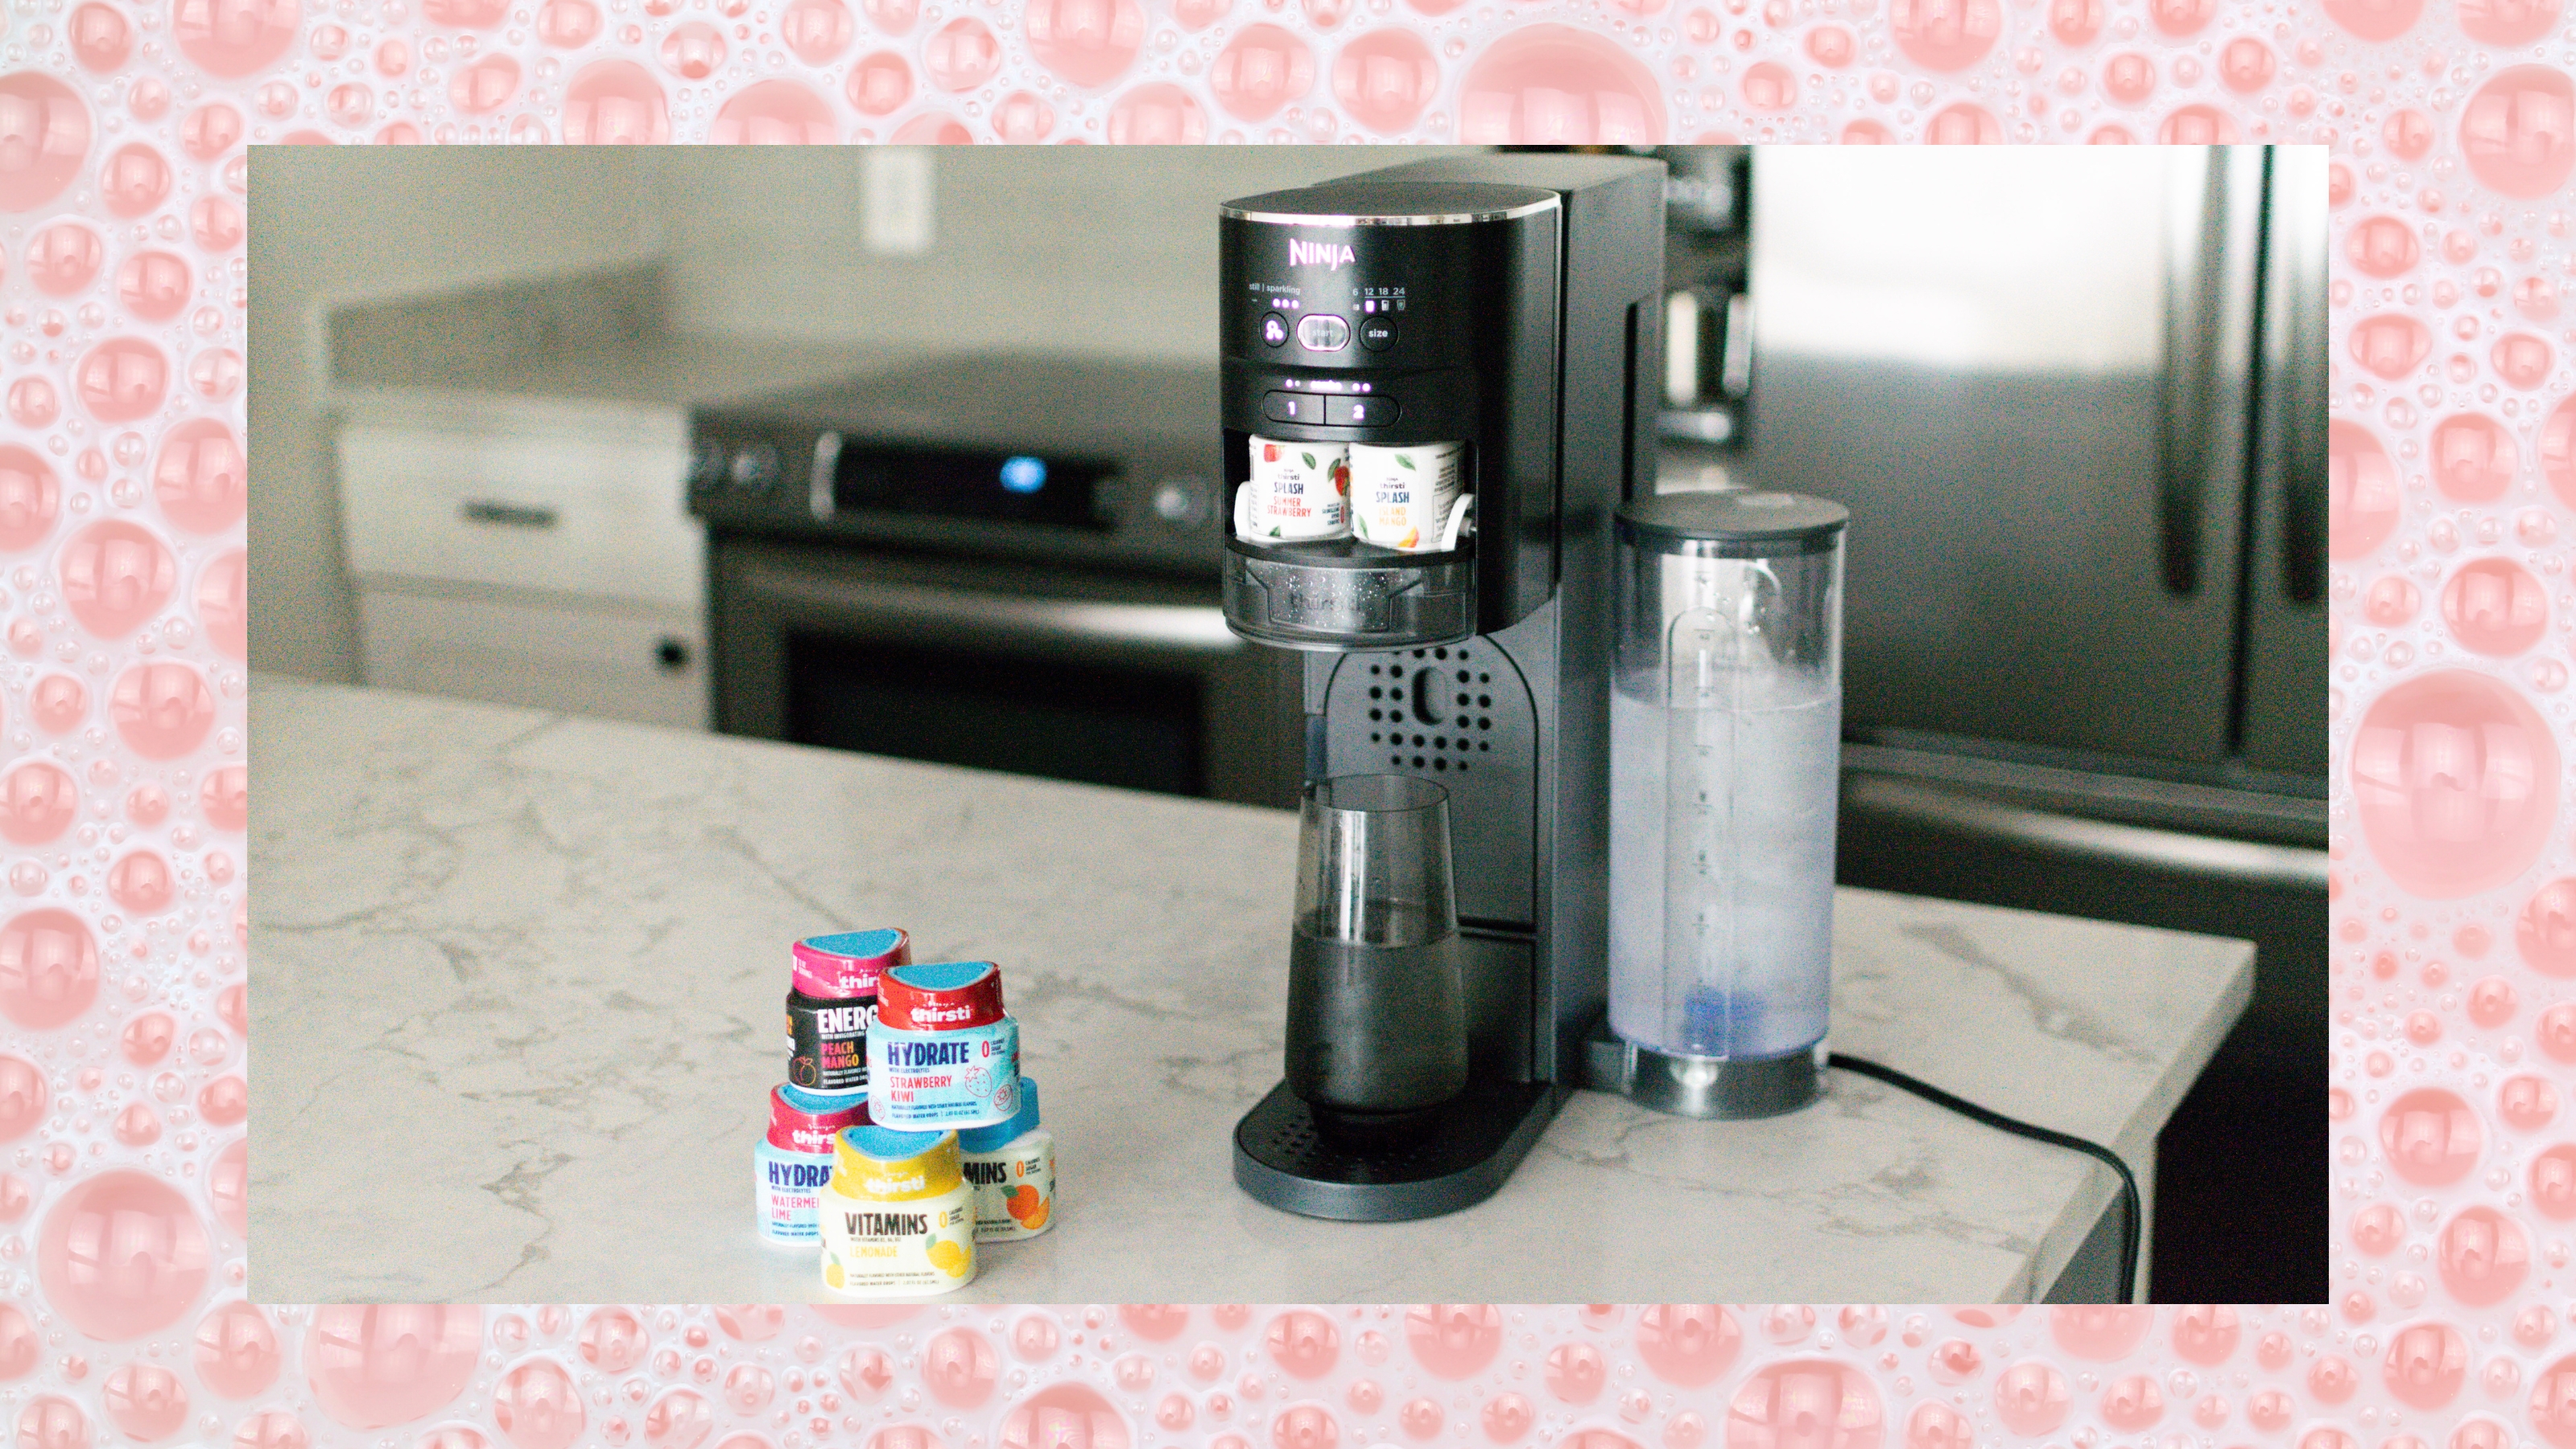 Ninja Thirsti review: A quick and easy way to customize drinks